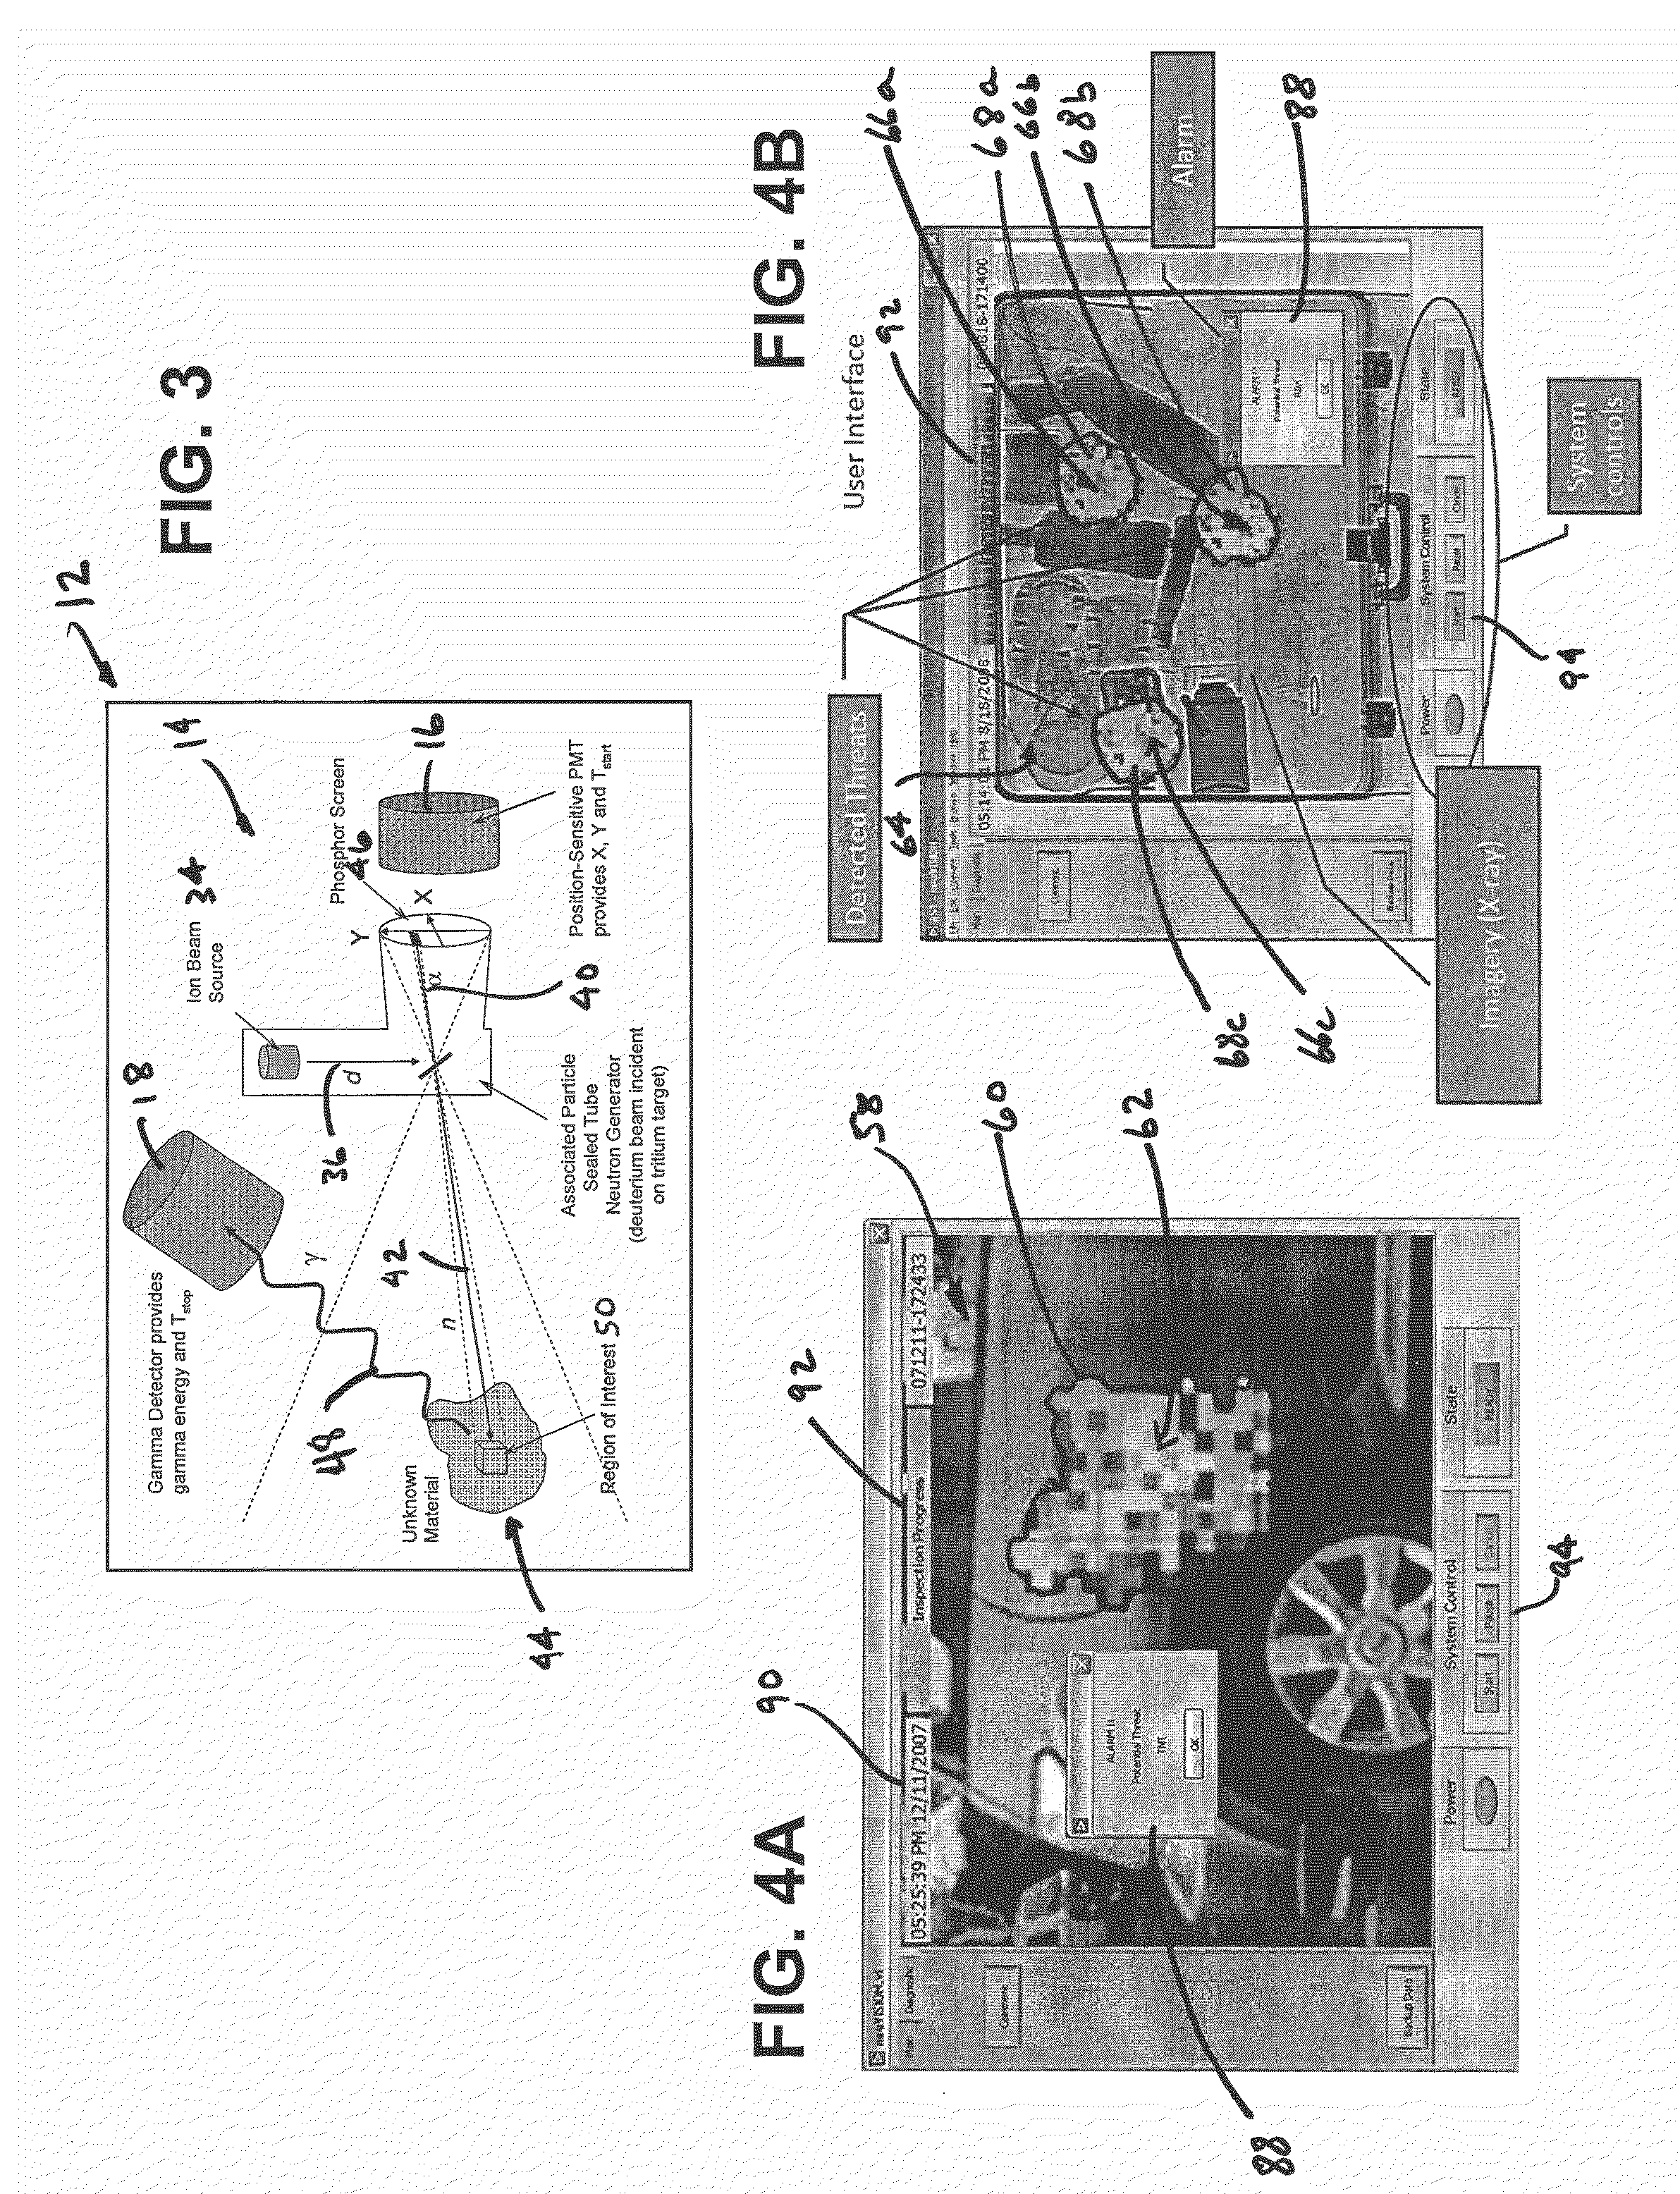 Article inspection system and method